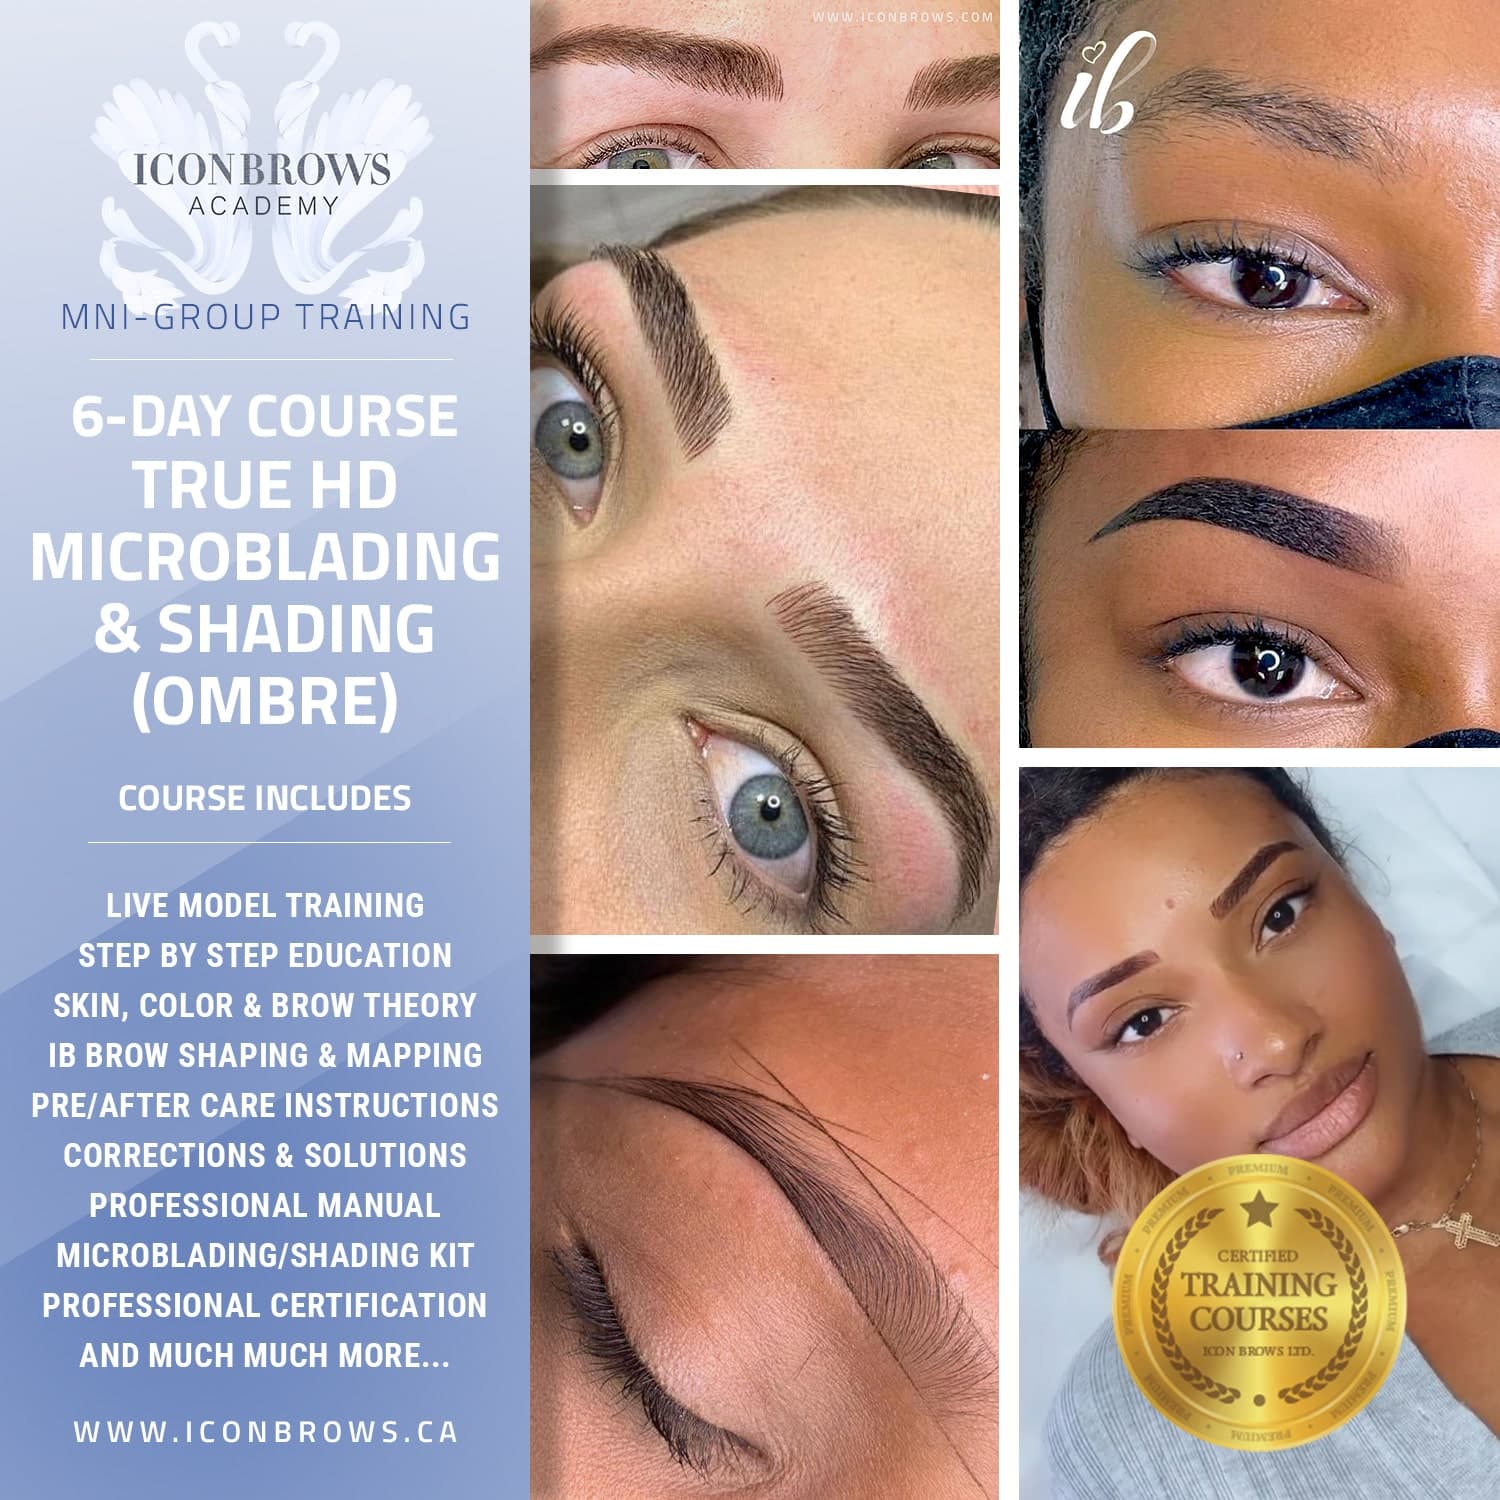 Mini Group Training of Microshading Ombre, Powder Brows & Microblading Permanent Makeup in Toronto.